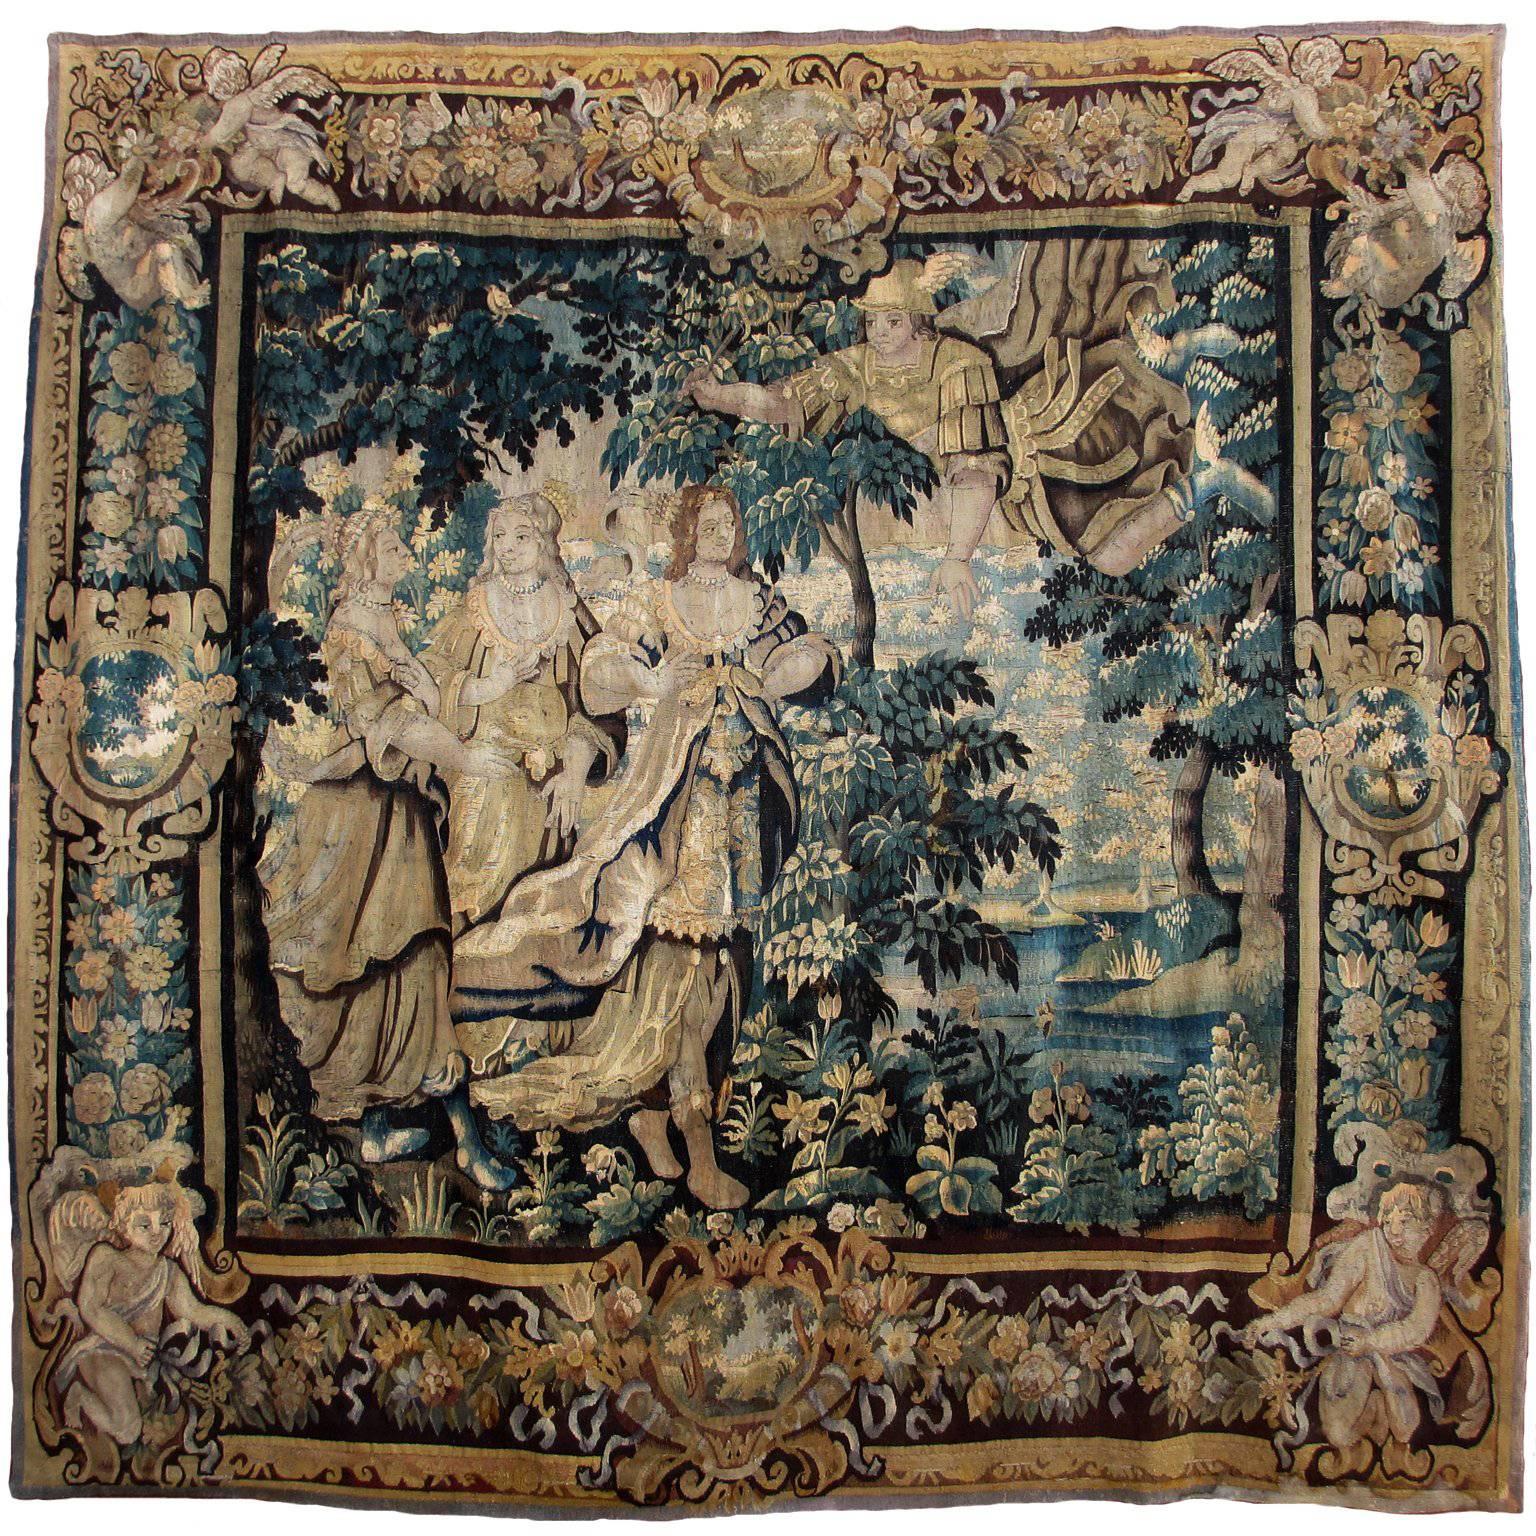 Franco-Flemish 18th Century Figural Tapestry Allegorical to "Triumph & Love" For Sale